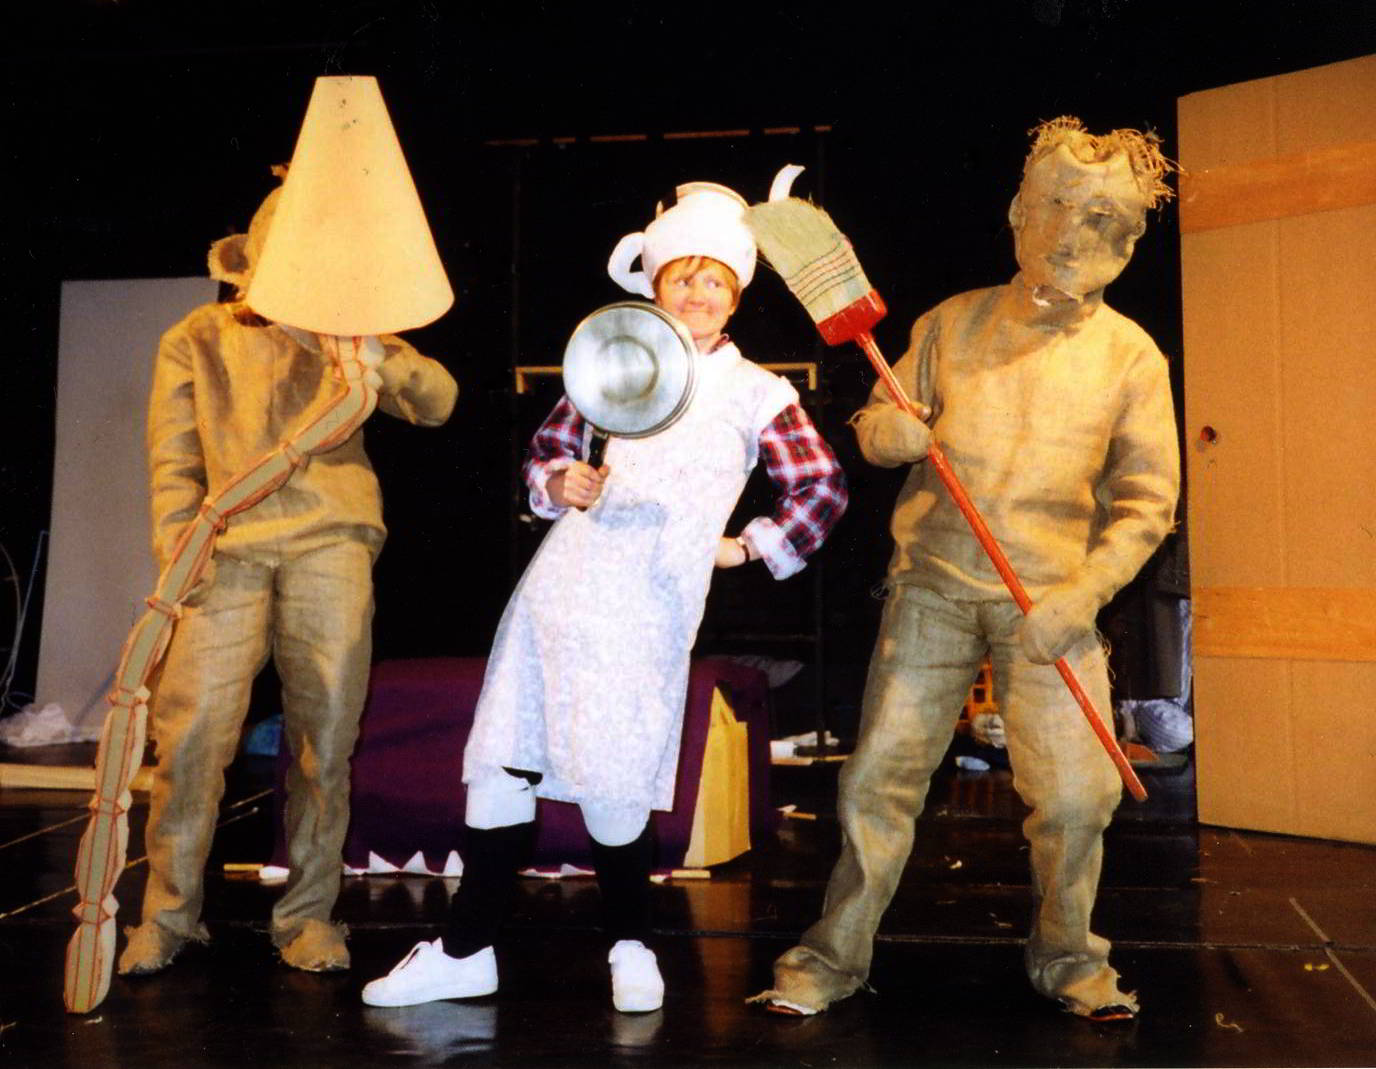 Handspan Theatre Daze of Our Lives hessian bag figures holding a lampshade (L) and a broom (R) in dance rehearsal with woman dressed in white holding a saucepan